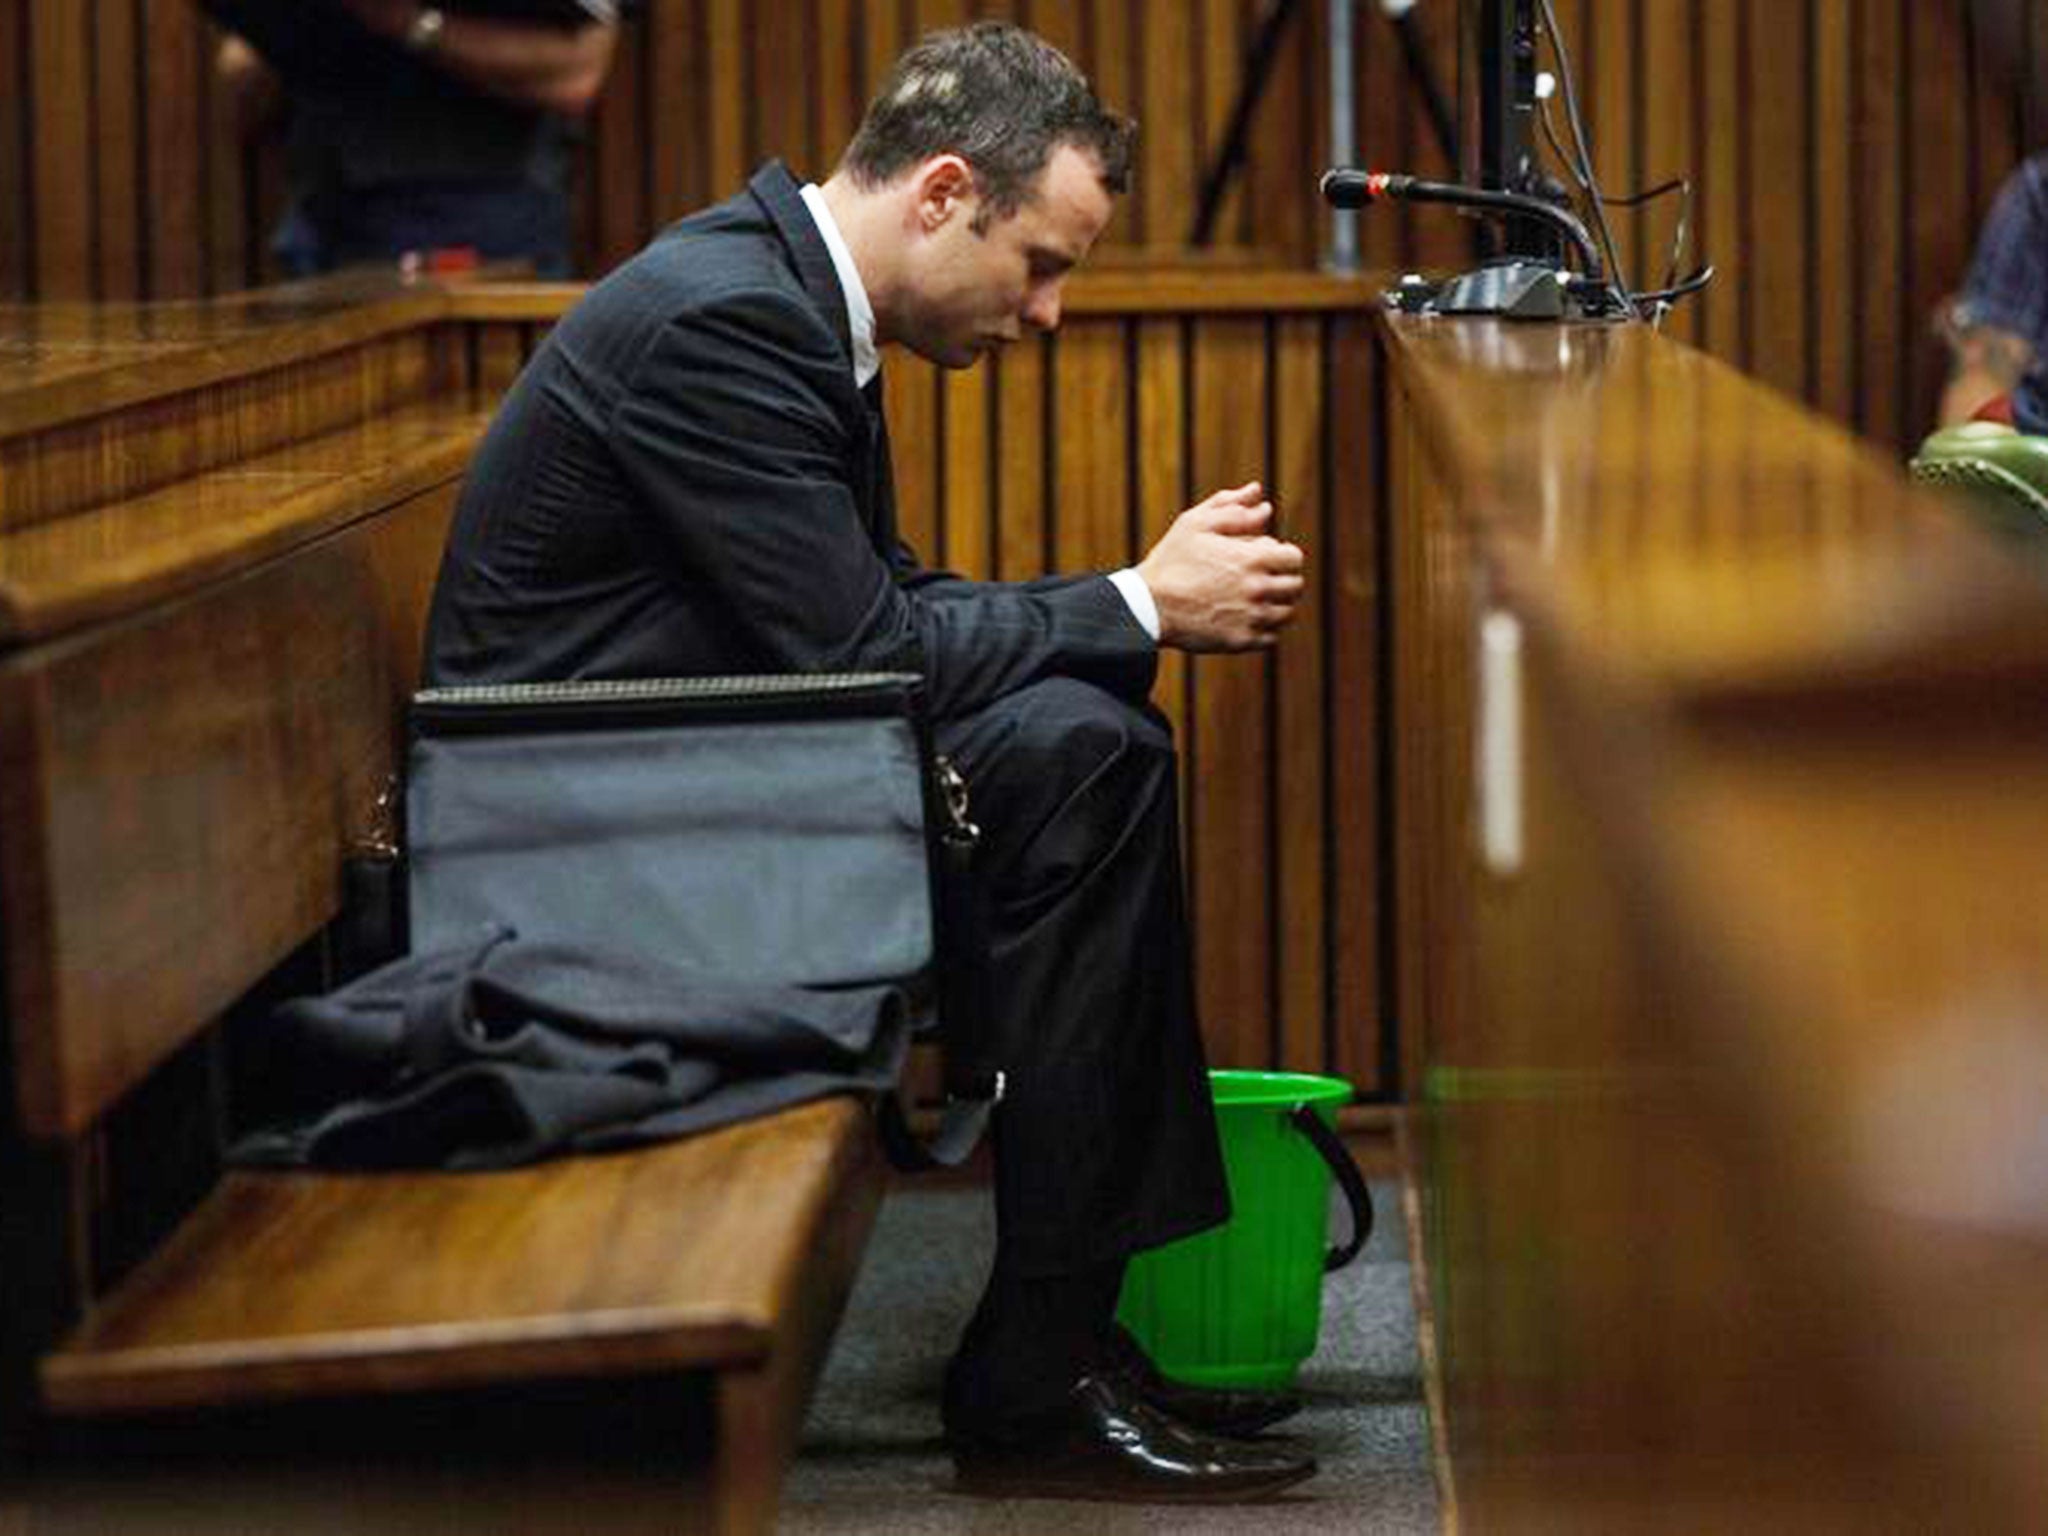 South African Paralympic athlete Oscar Pistorius in court today